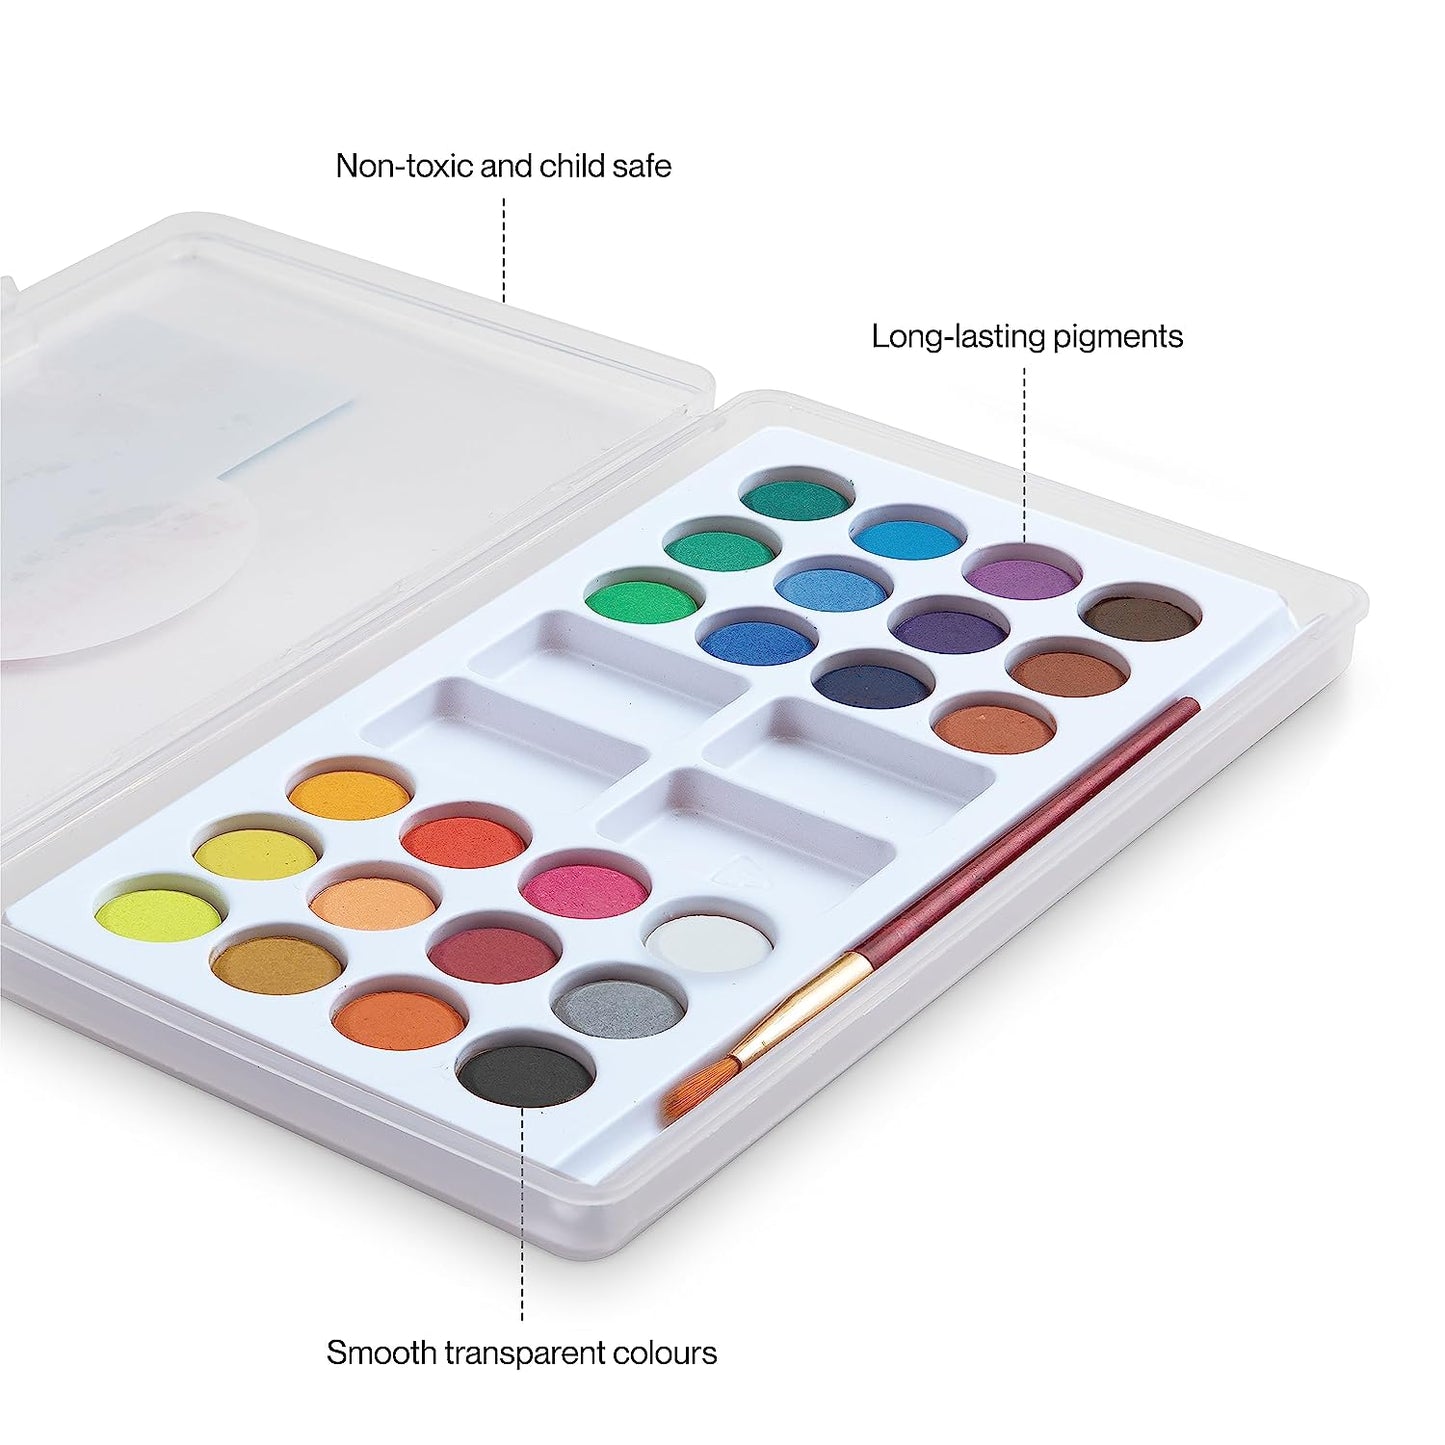 Camel Student Water Color Cakes - 24 Shades